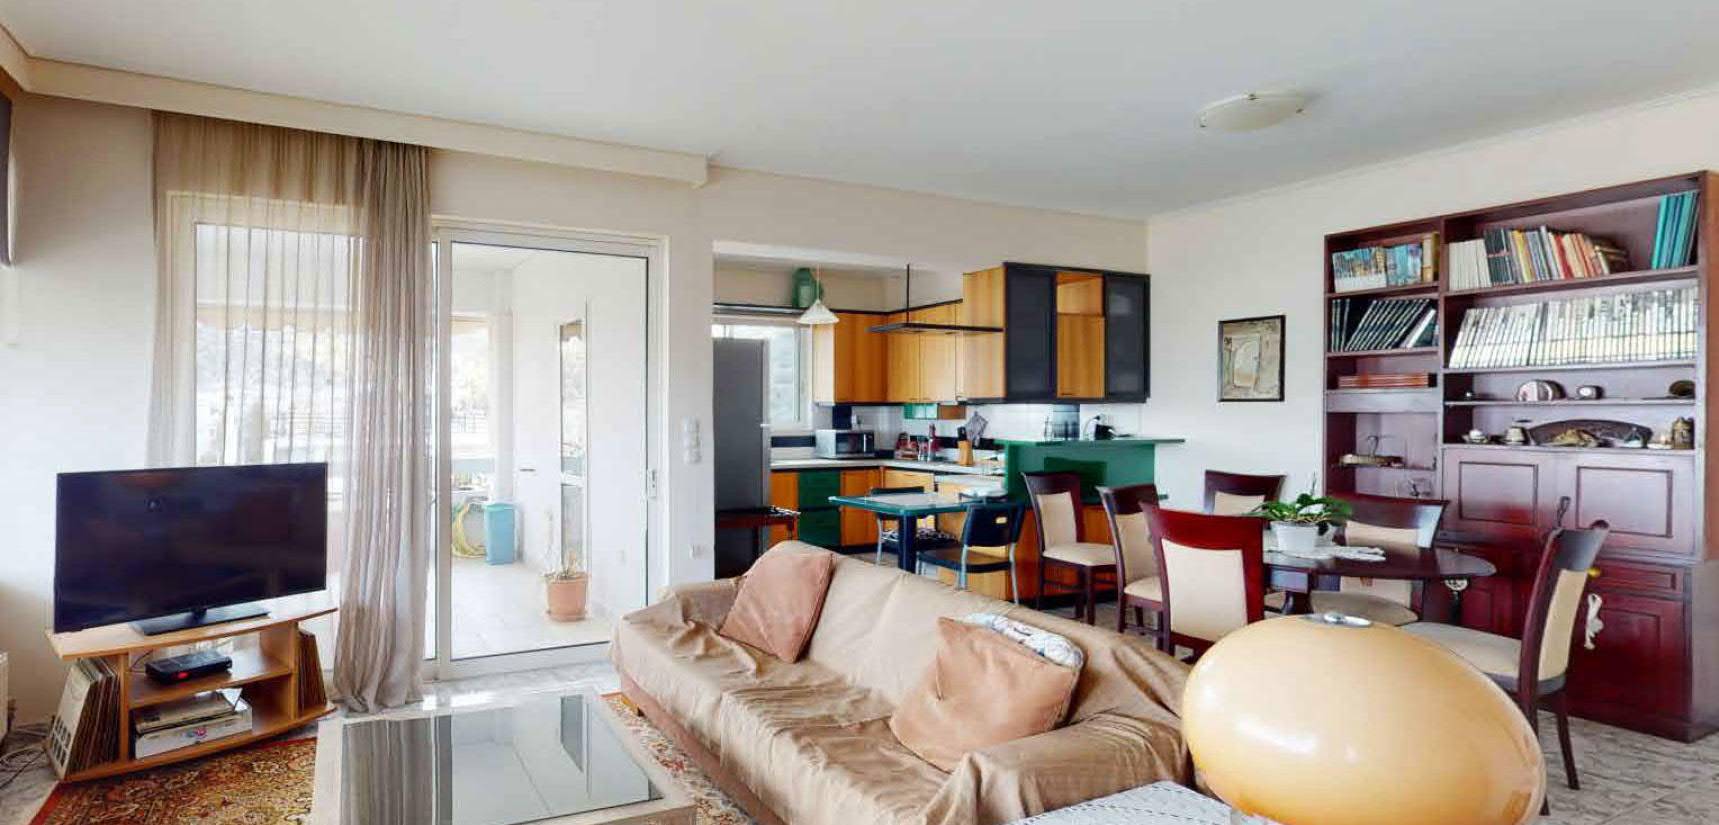 Lovely Apartment on the 3rd Floor with unobstructed views in Terpsithea, Glyfada